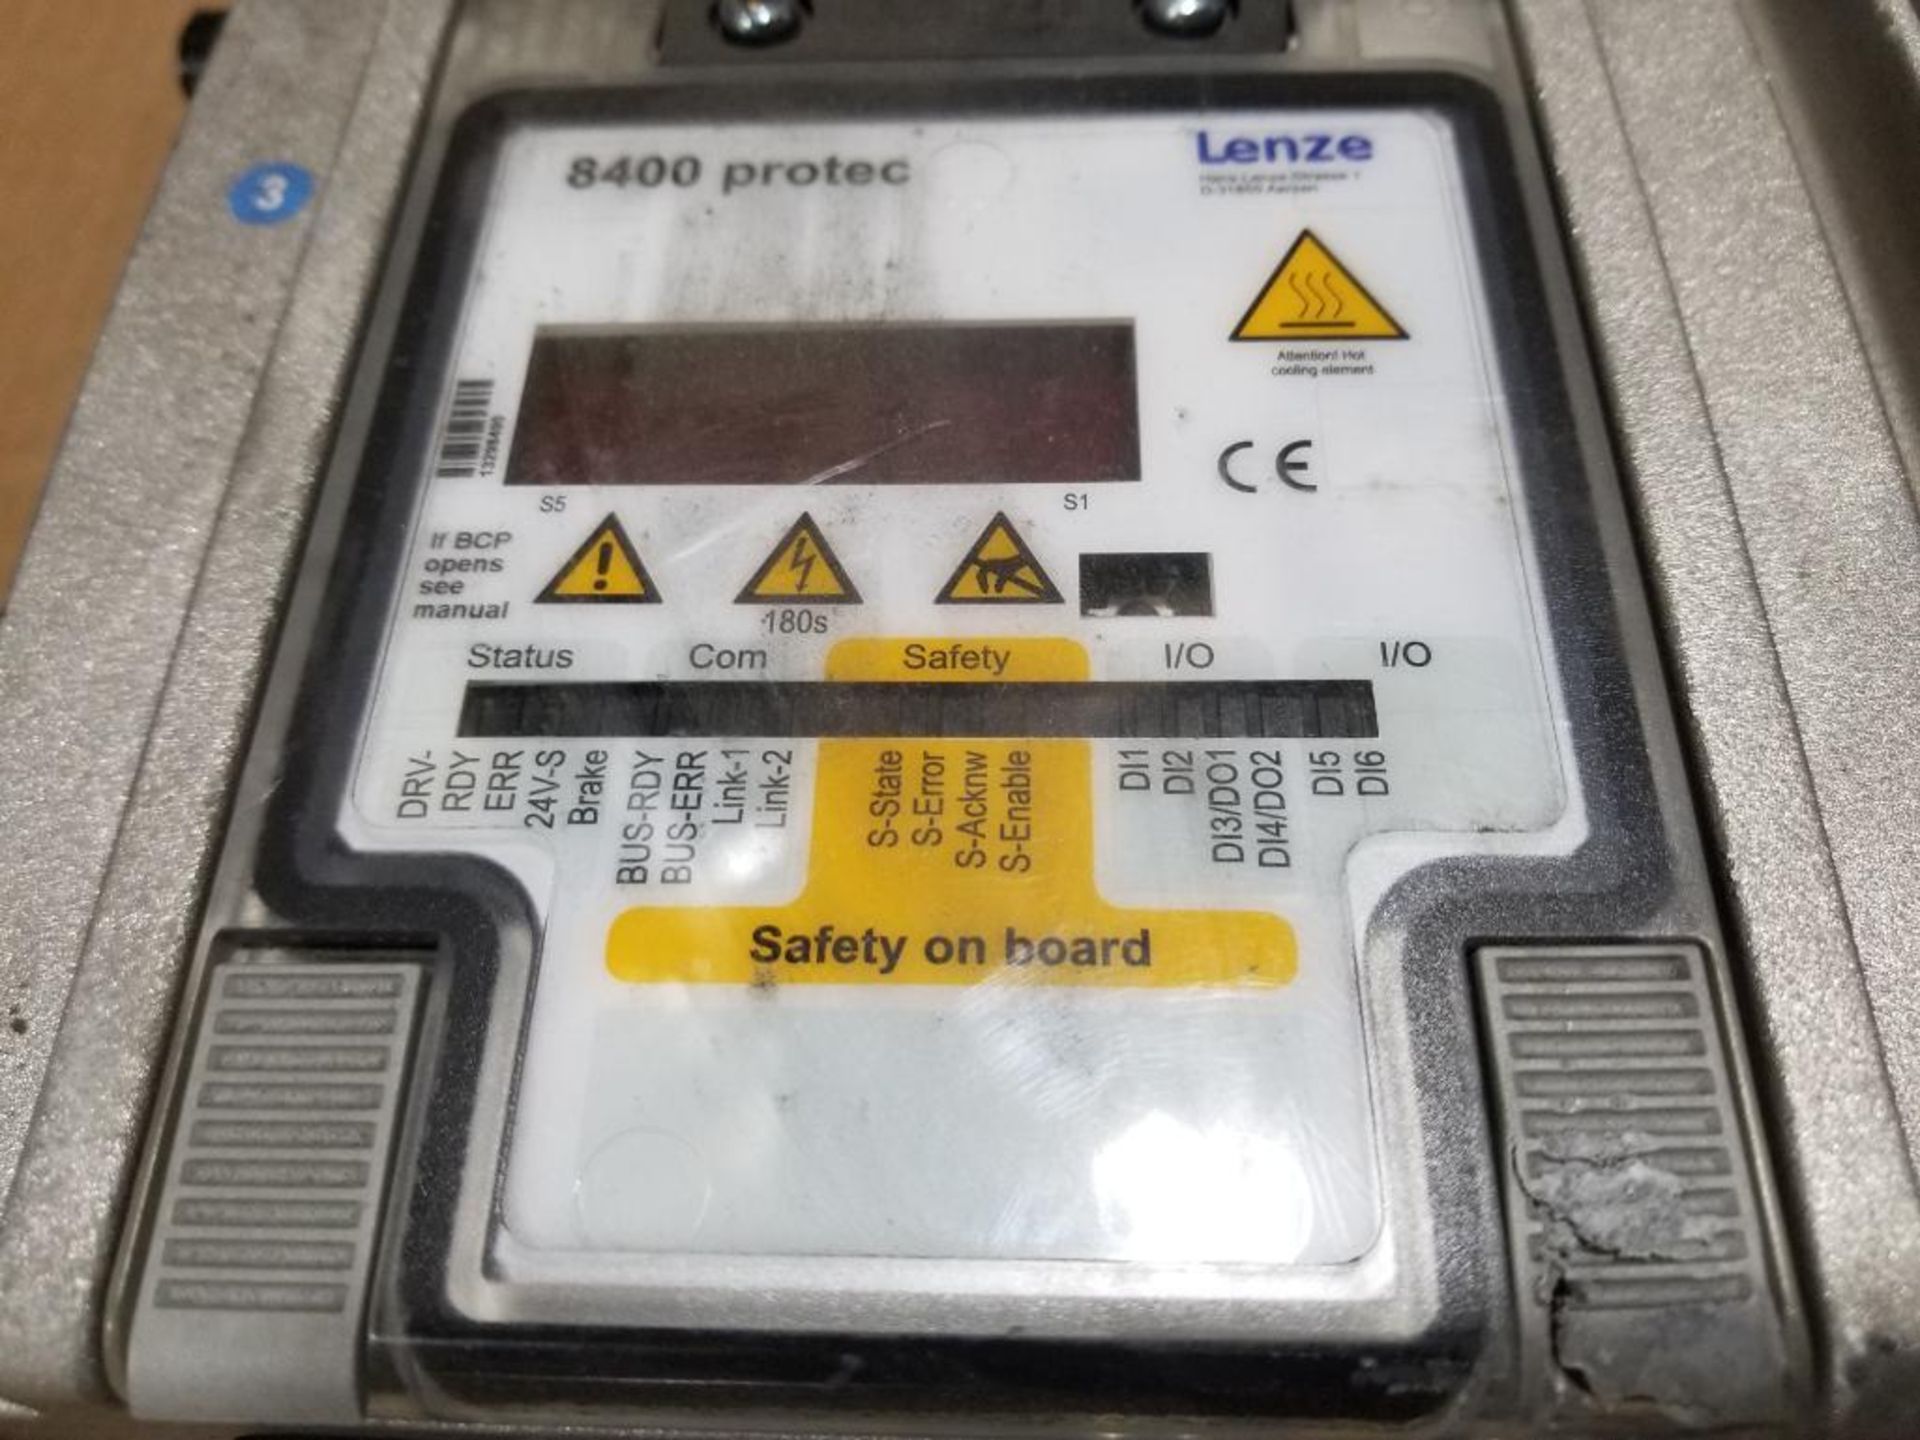 Lenze safety drive. 8400 protec. - Image 2 of 7